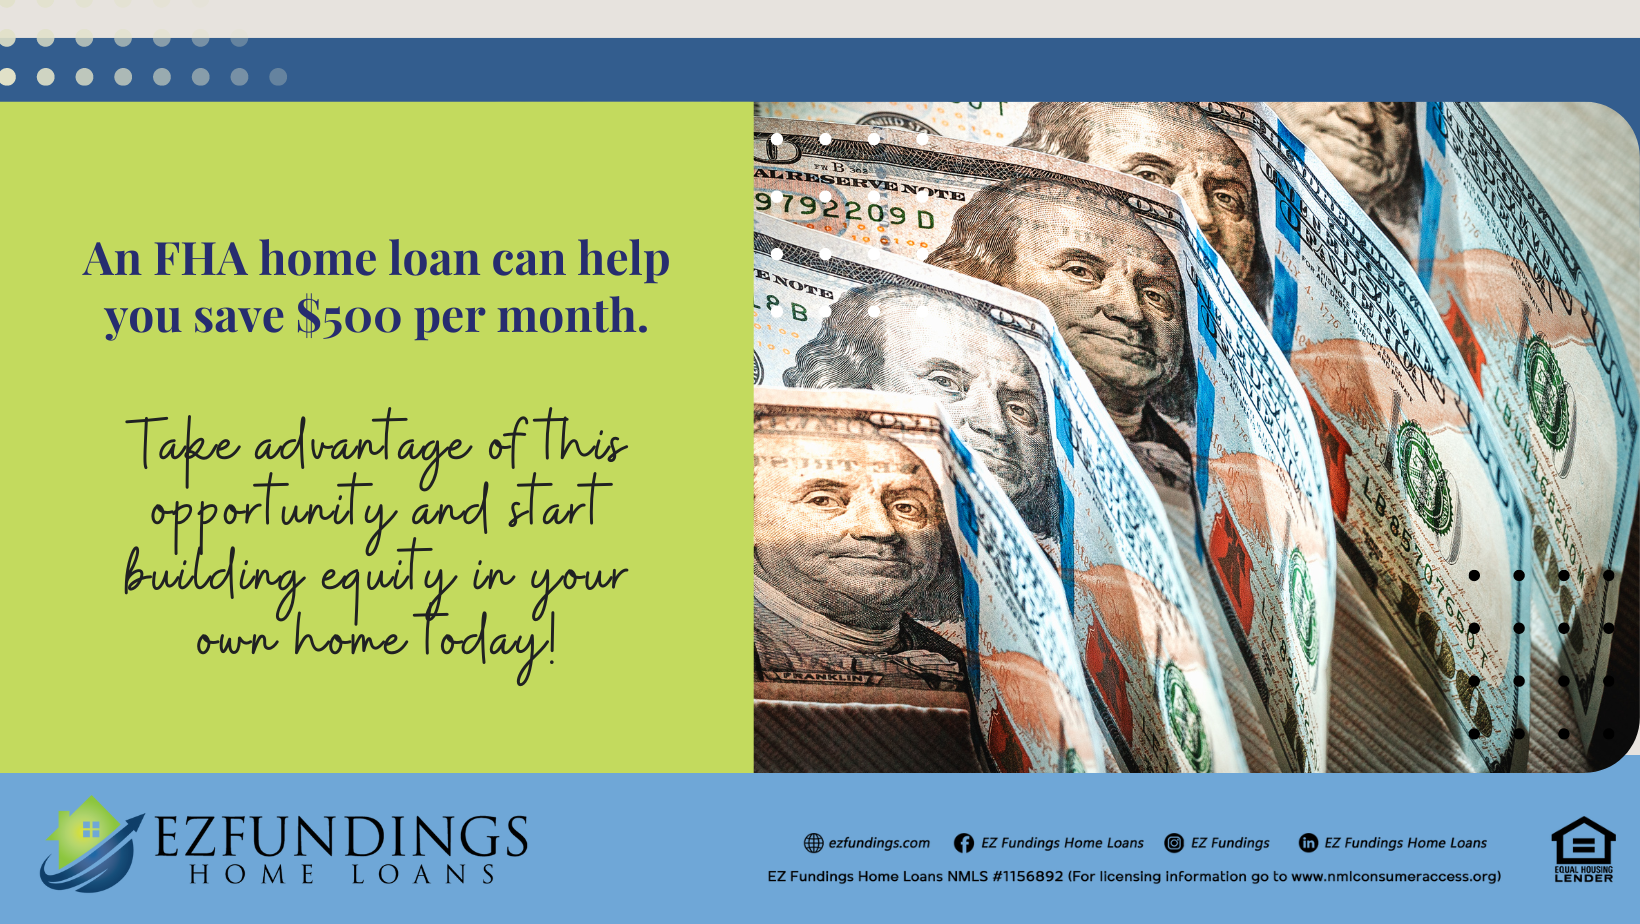 An FHA home loan can help you save $500 per month.